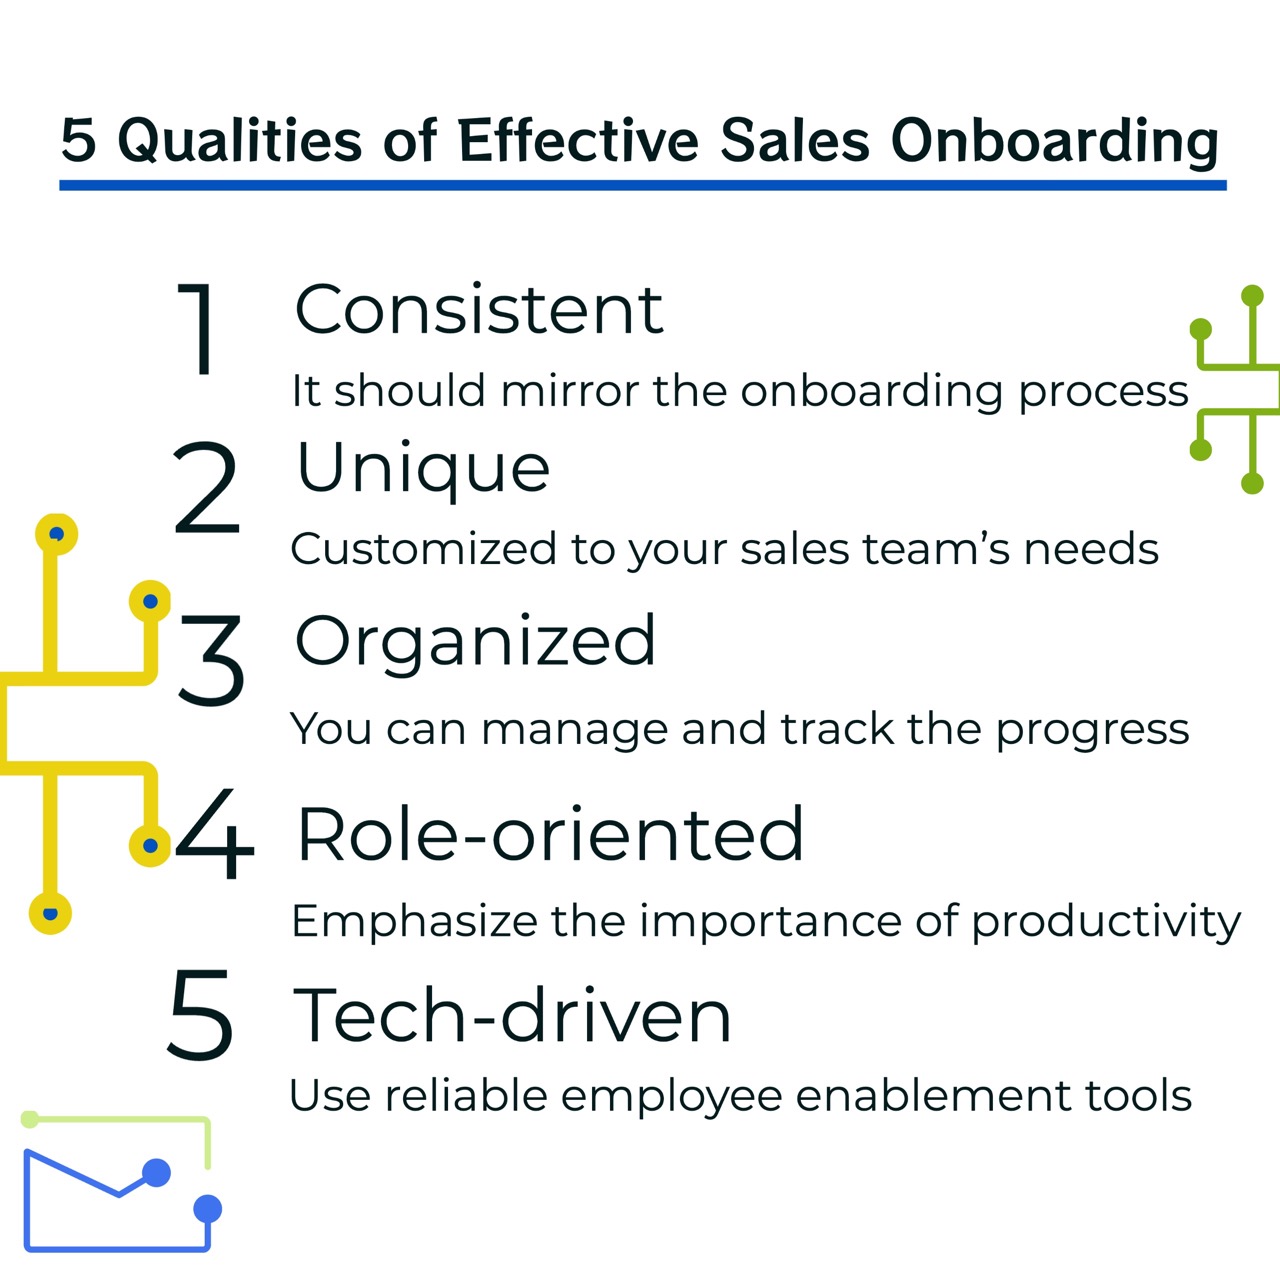 How to onboard sales effectively